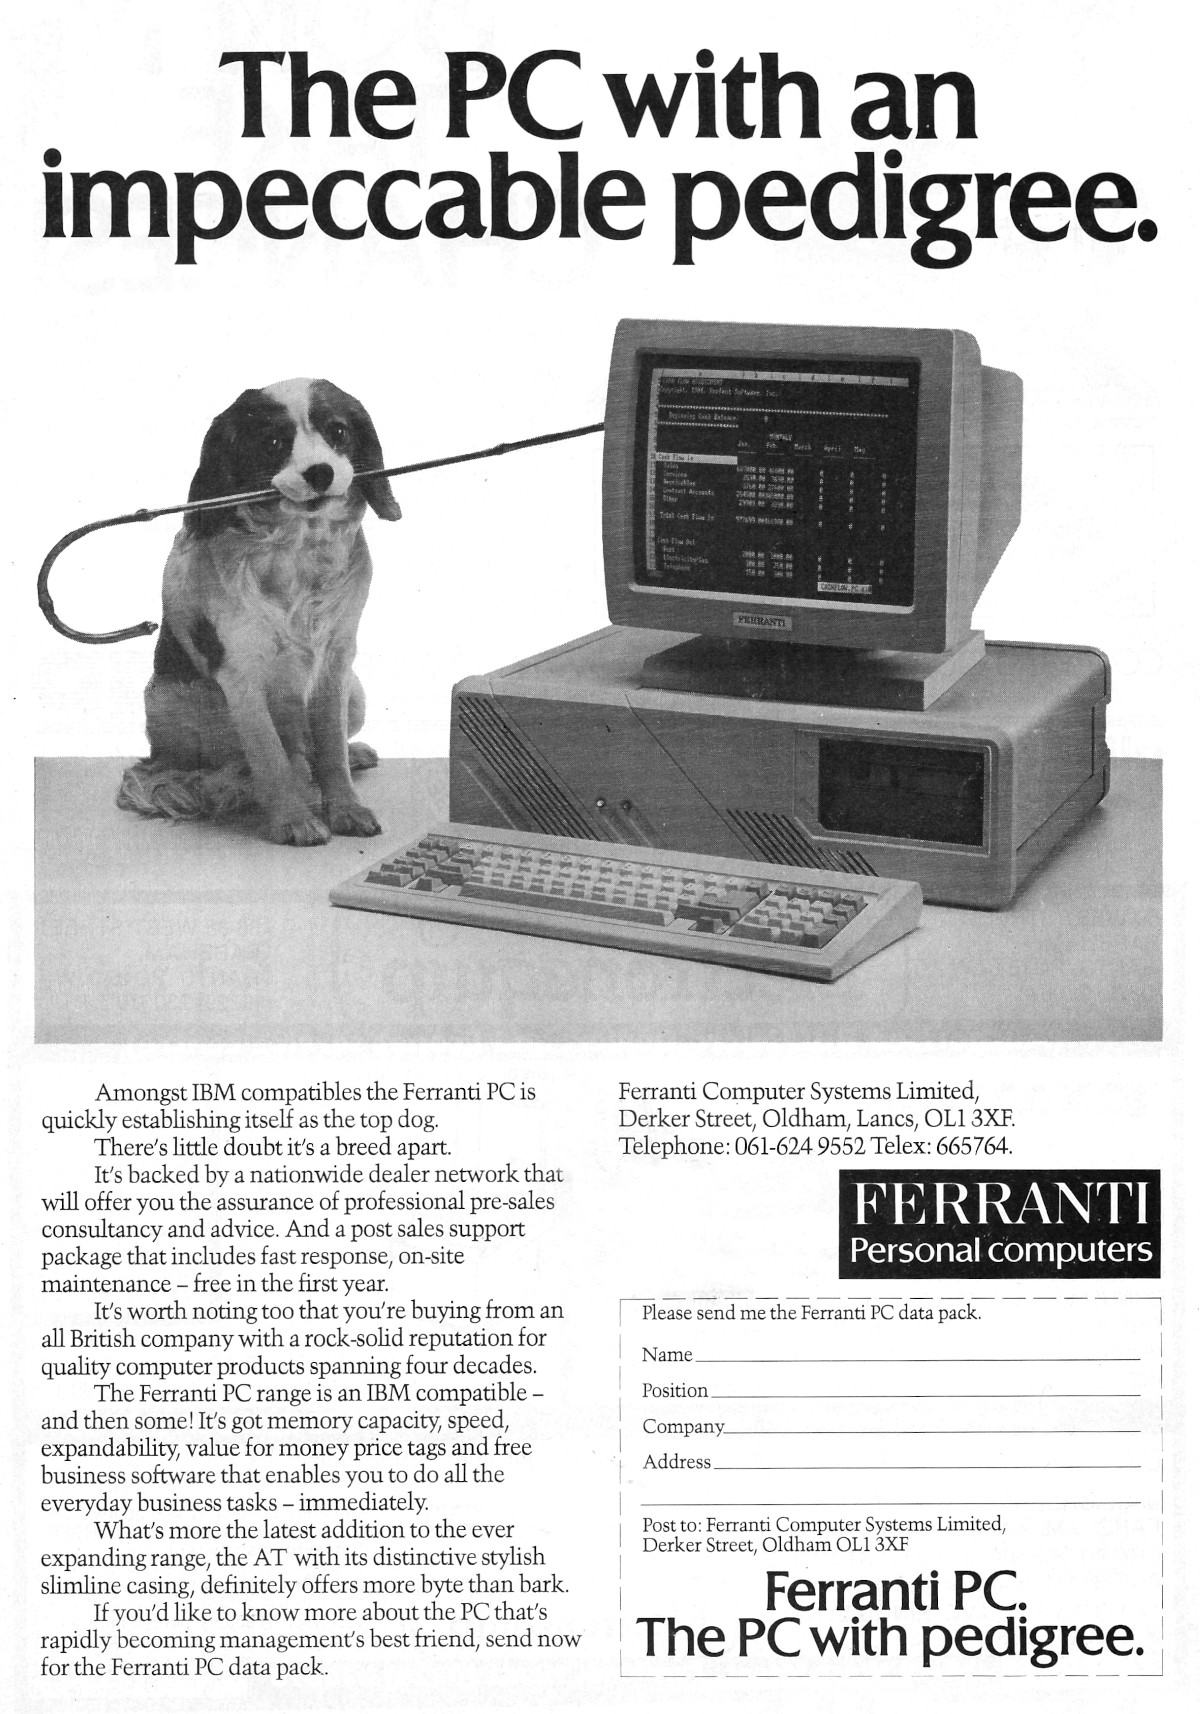 The original Ferranti PC AT, from Practical Computing, June 1986. Note the clear dig at <span class='hilite'><span class='hilite'>IBM</span></span>, with the dog holding Charlie Chaplin's cane in its mouth.